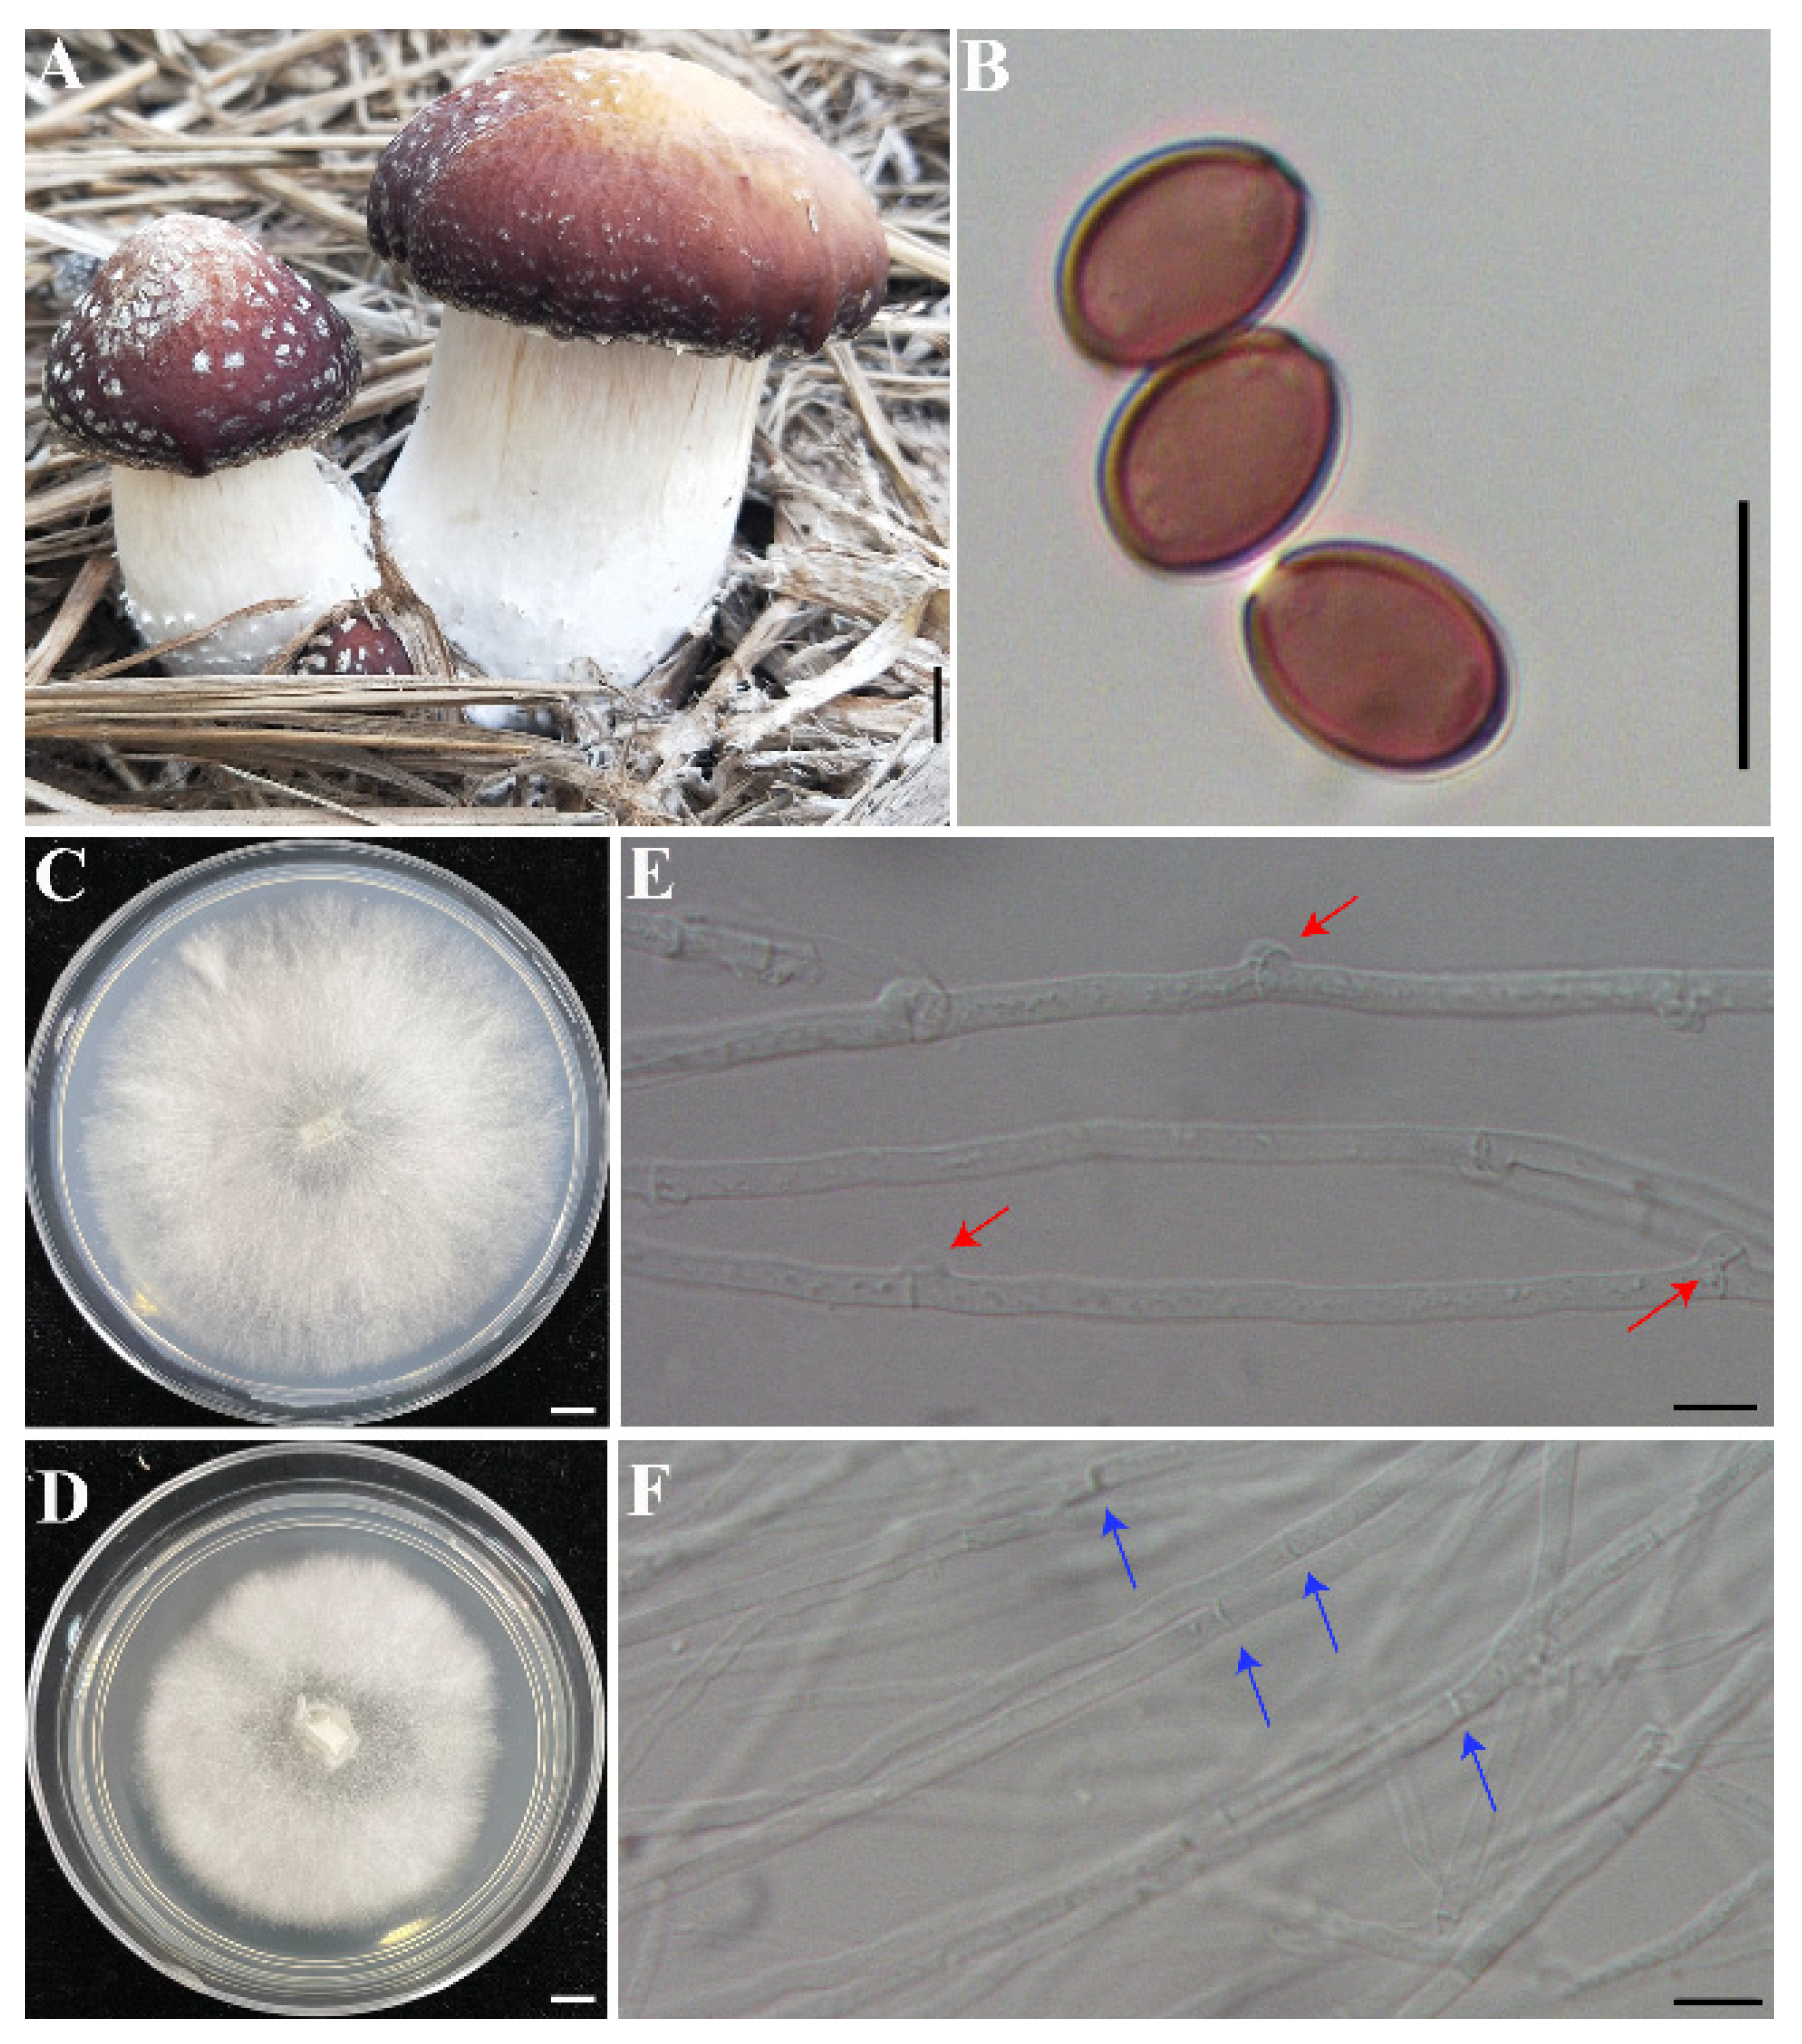 JoF | Free Full-Text | Genomic Analysis of Stropharia rugosoannulata  Reveals Its Nutritional Strategy and Application Potential in  Bioremediation | HTML